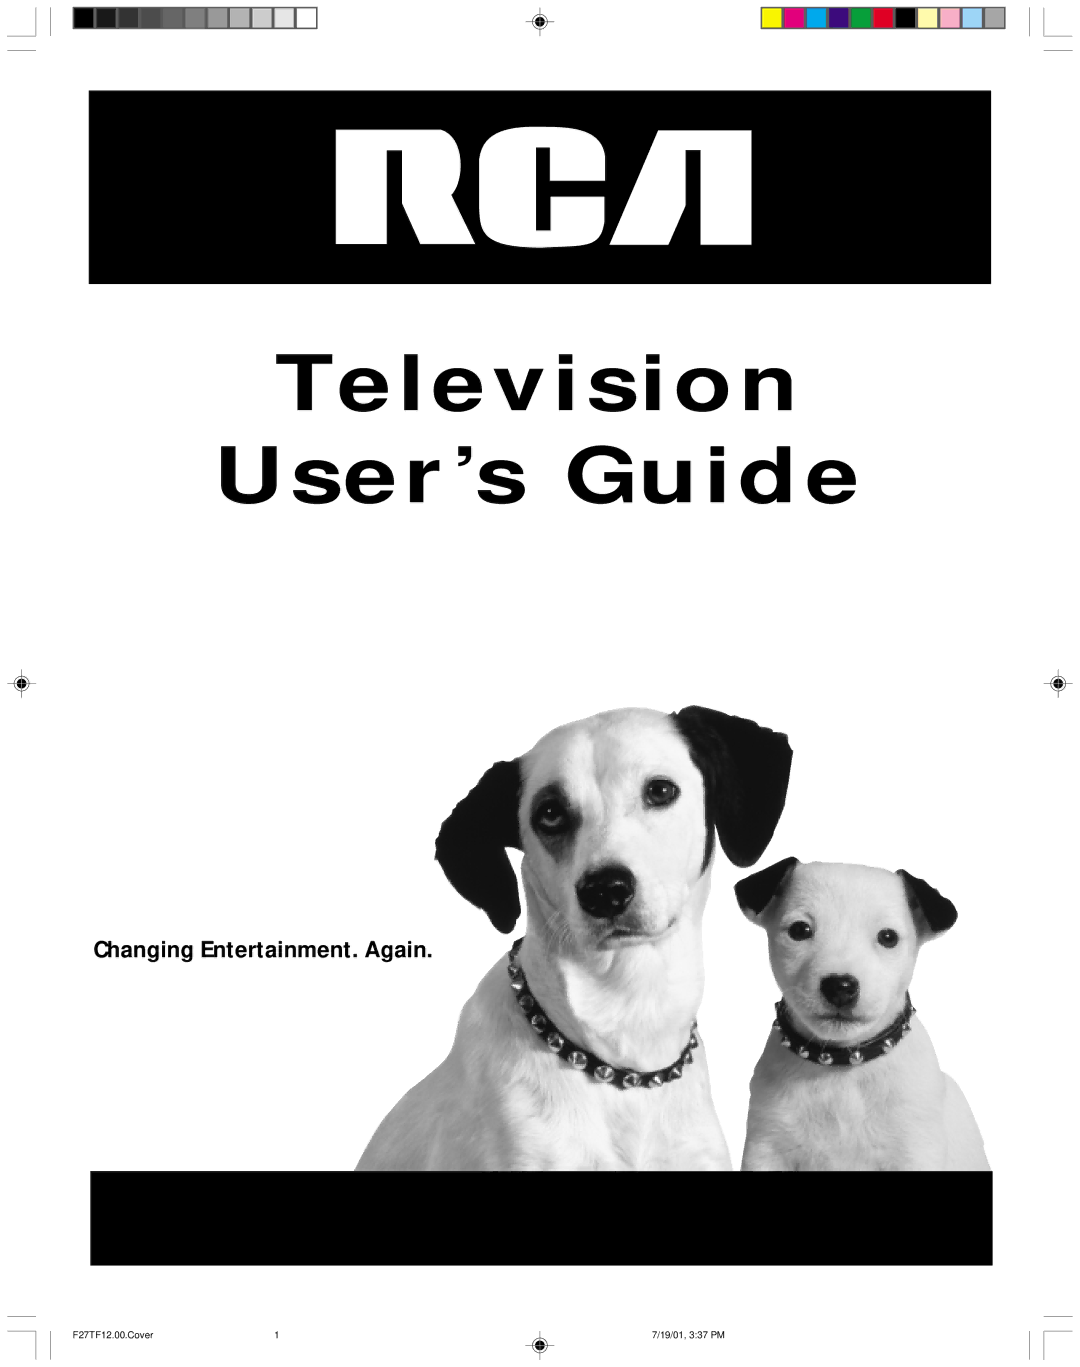 RCA F27TF12 manual Television User’s Guide, Changing Entertainment. Again 